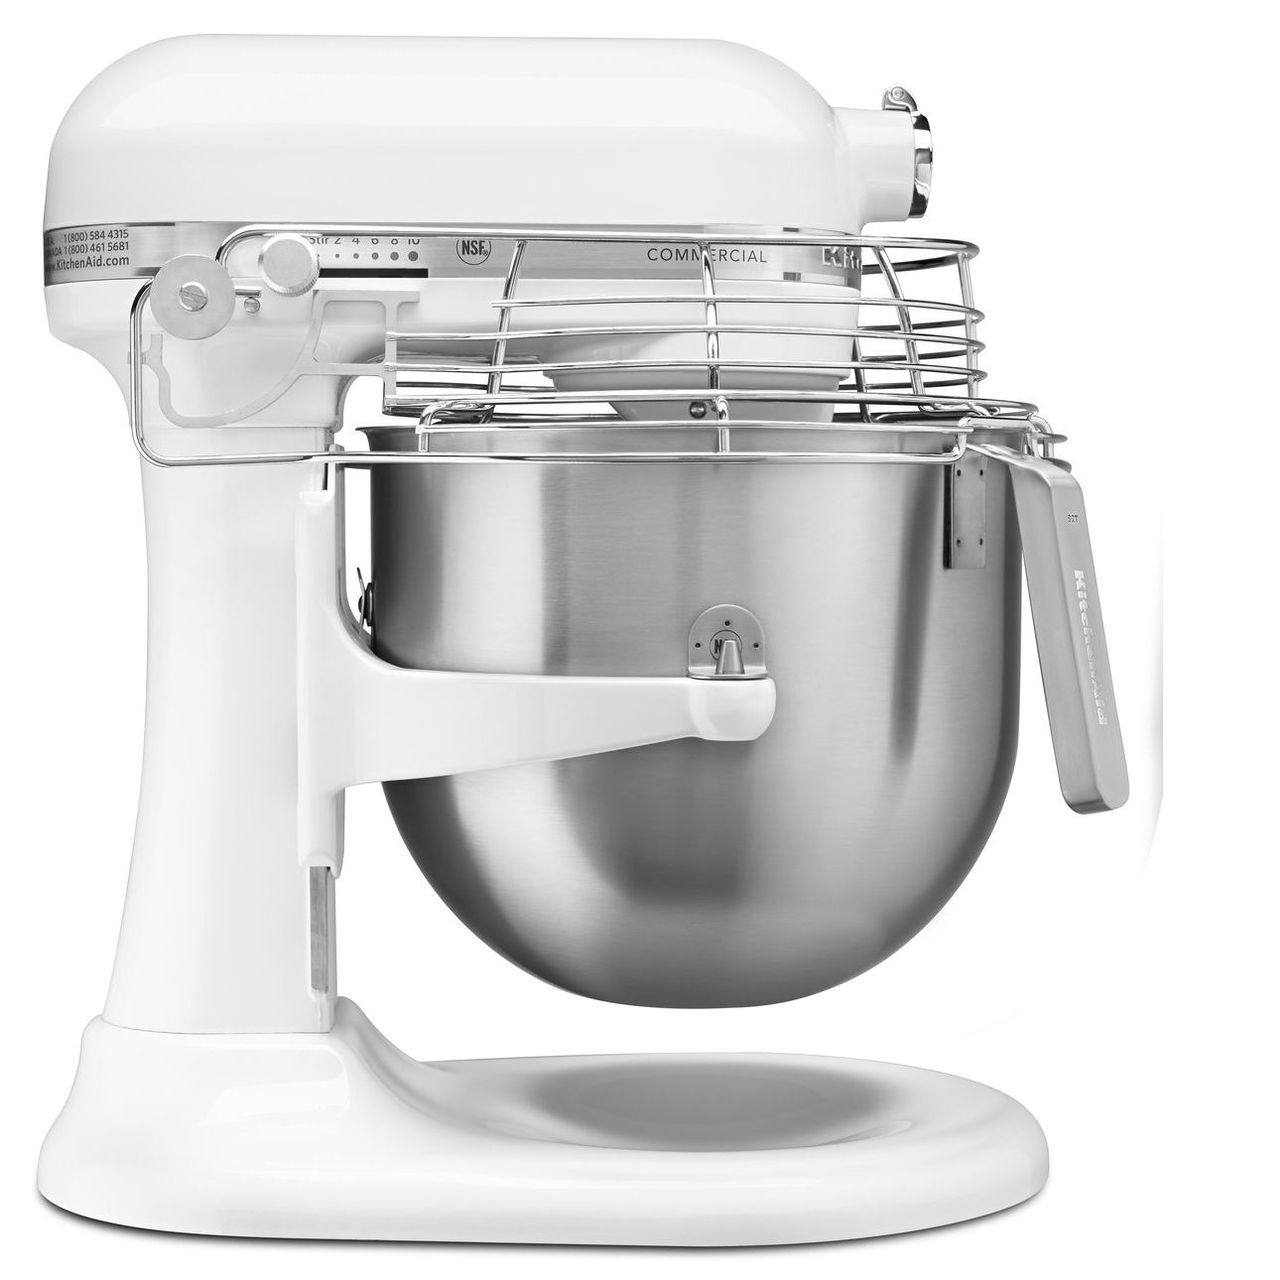 KitchenAid 8-Quart Stainless Steel Bowl + Stand Mixer Accessory Pack | Fits  8-Quart KitchenAid Commercial Bowl-Lift Stand Mixers